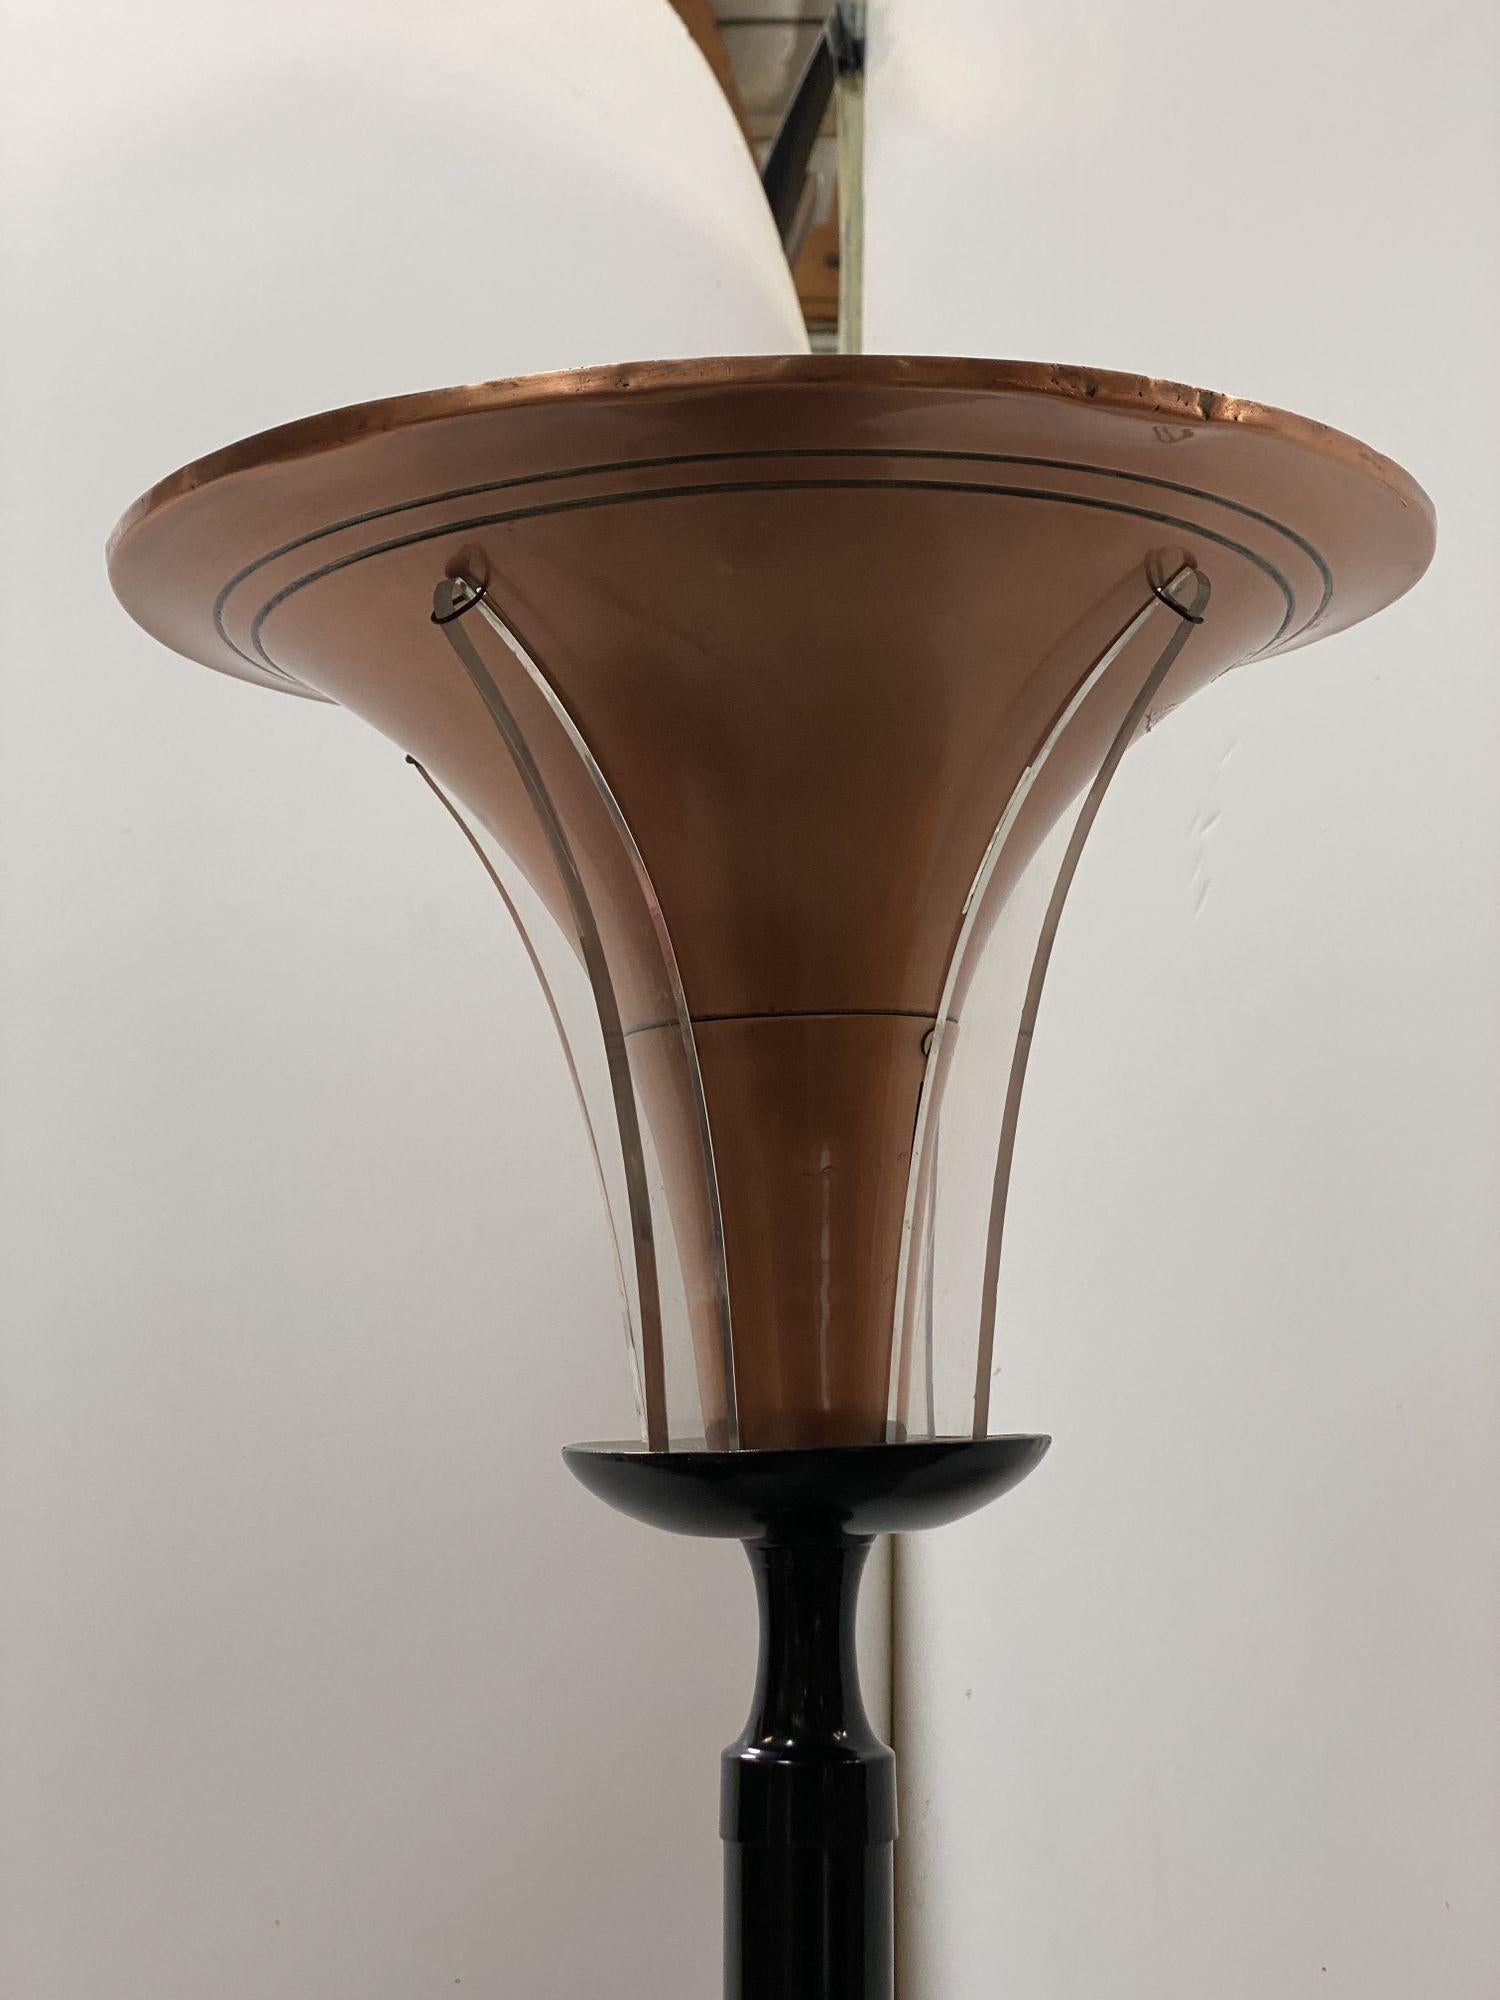 High Style Brass and Copper Art Deco Torchiere Floor Lamp w/ Acrylic Accents For Sale 2